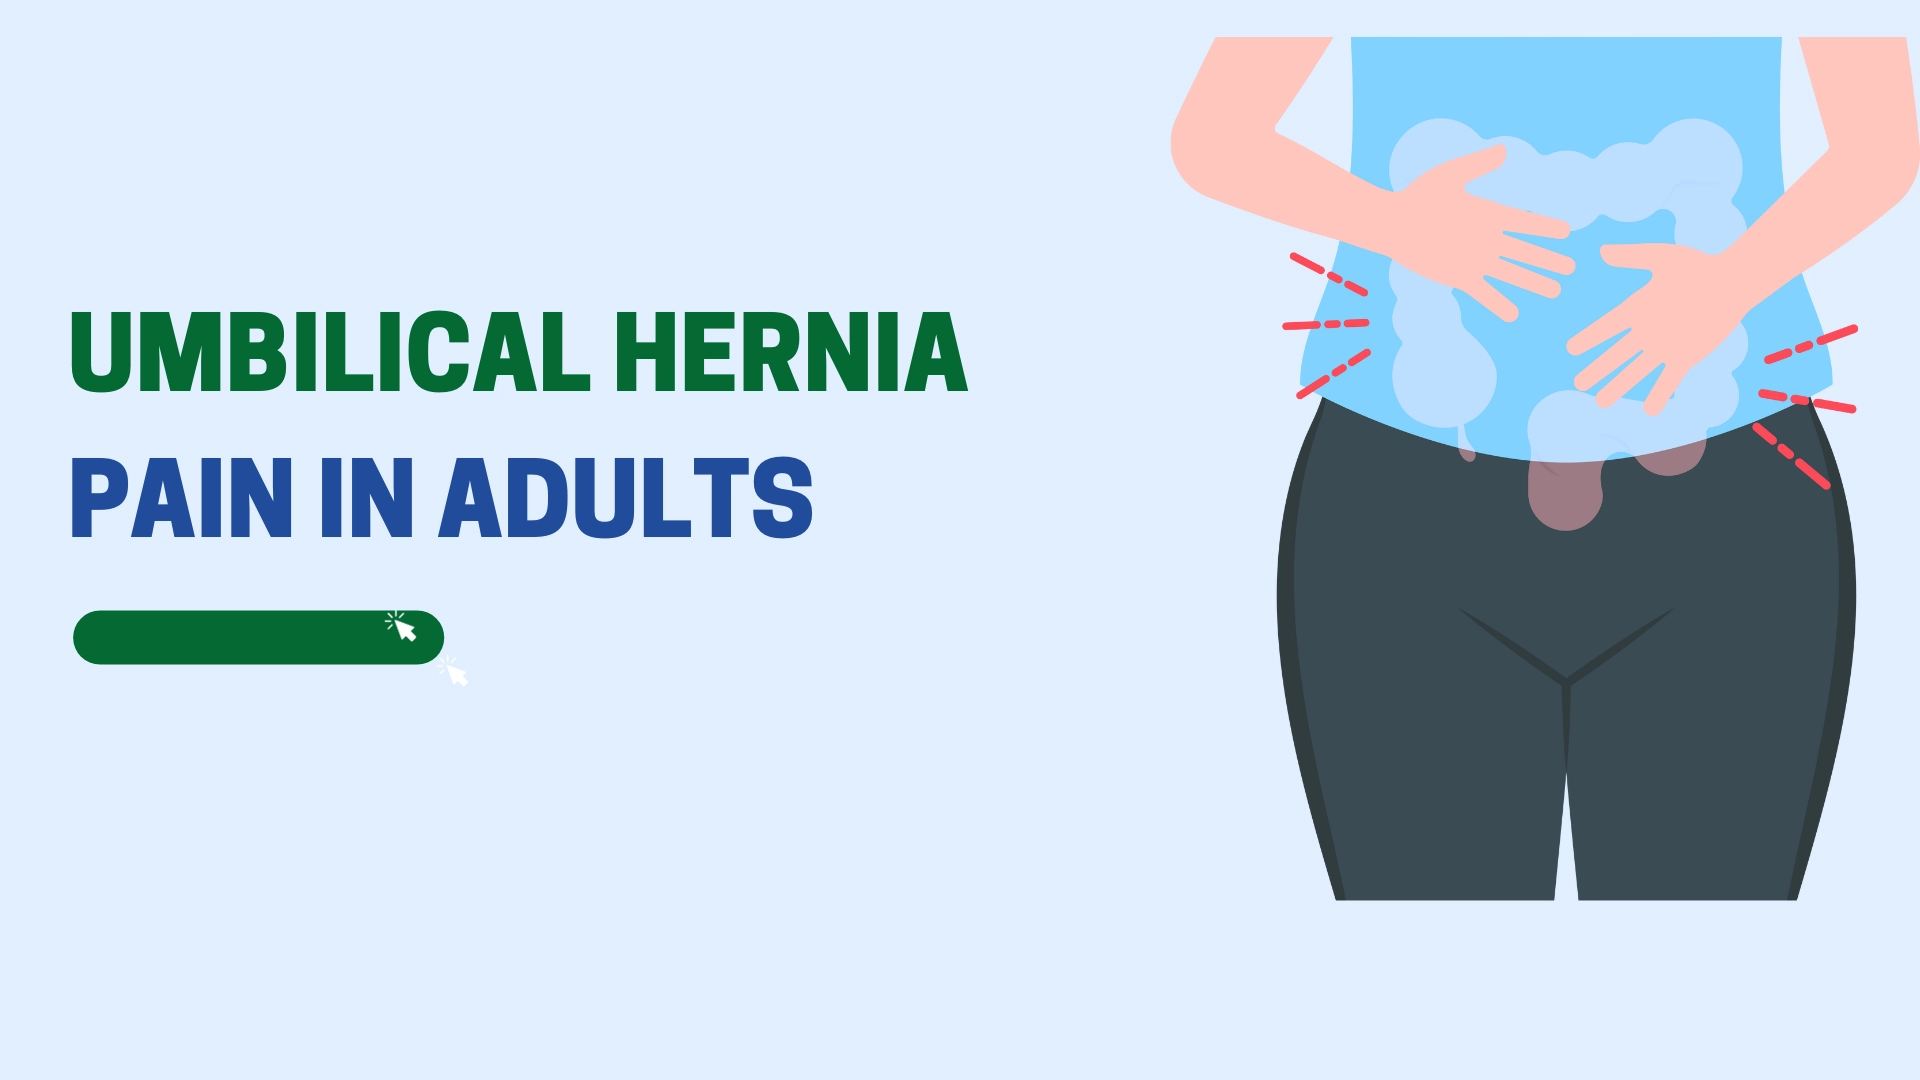 Umbilical Hernia pain in Adults